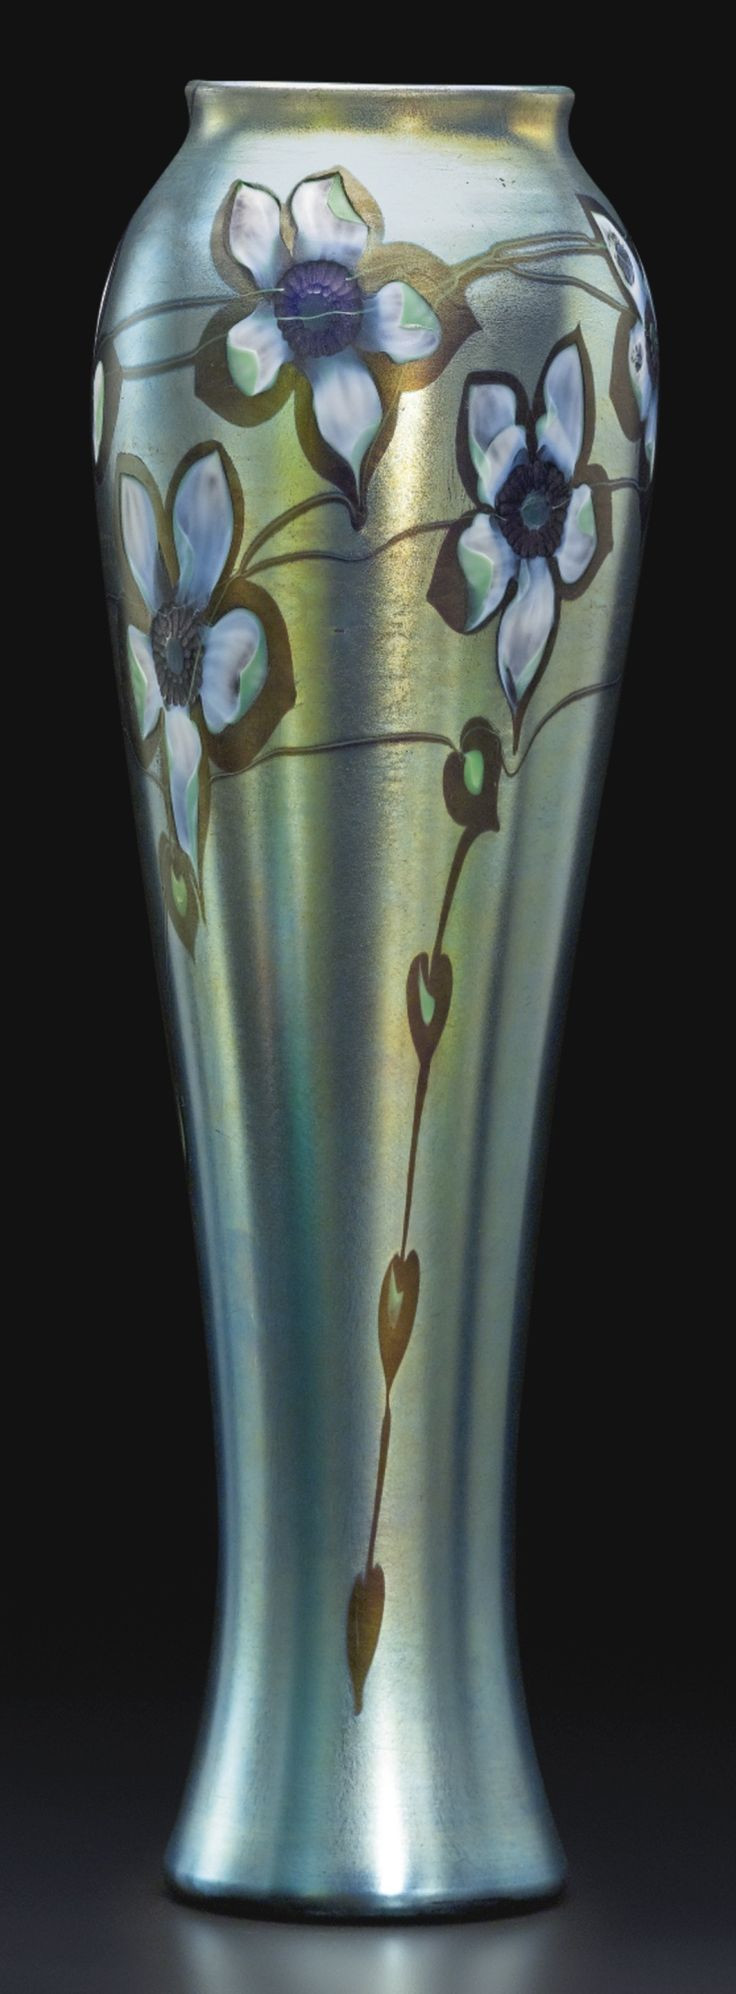 28 Awesome Tiffany Bud Vase 2024 free download tiffany bud vase of 662 best tiffany images on pinterest louis comfort tiffany within tiffany studios carved cameo vase engraved 8036e l c tiffany favrile favrile glass 17 1